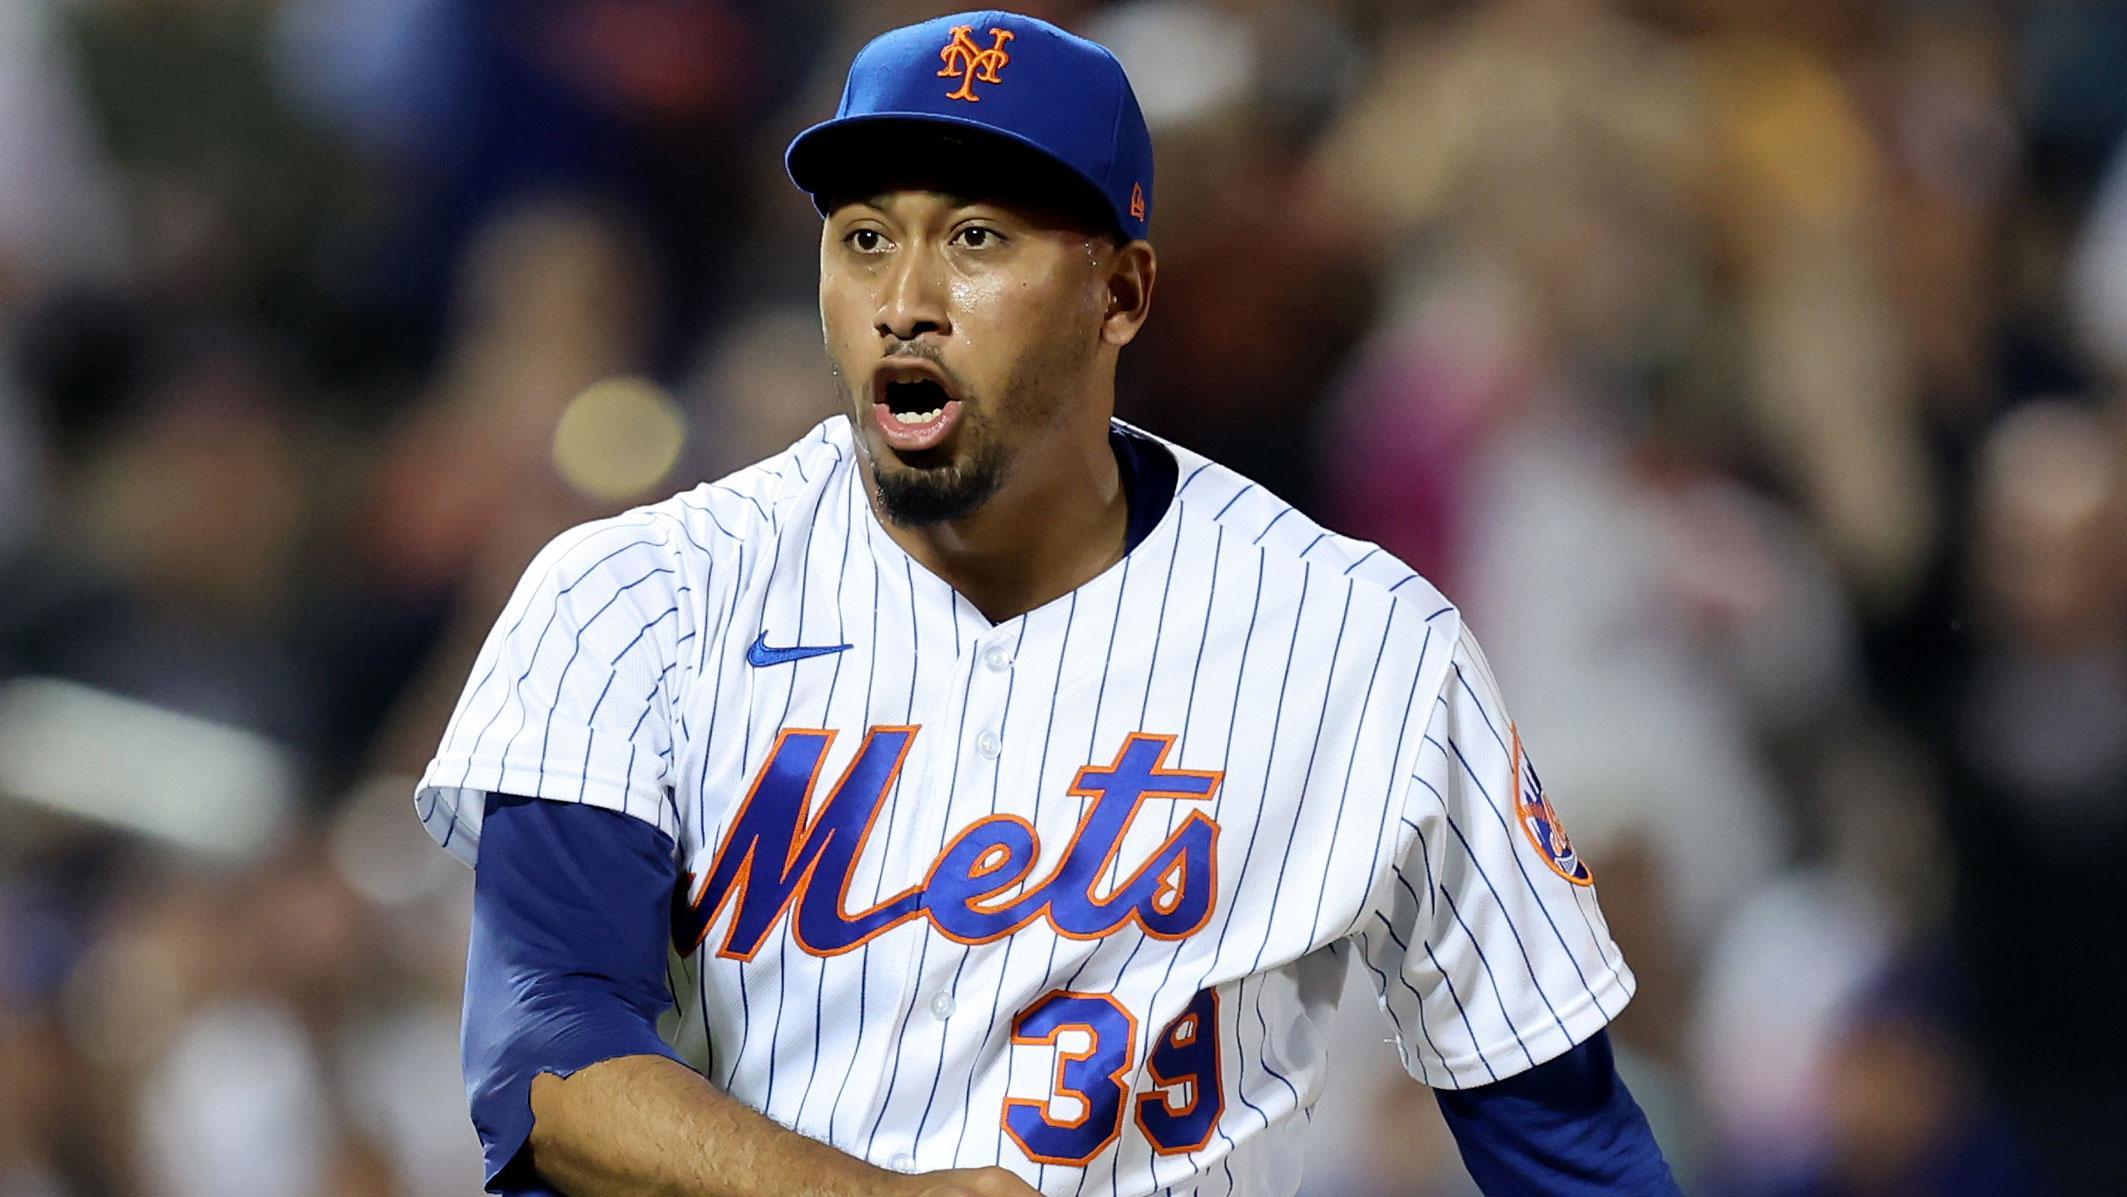 Aug 4, 2022; New York City, New York, USA; New York Mets relief pitcher Edwin Diaz (39) reacts during the eighth inning against the Atlanta Braves at Citi Field. / Brad Penner-USA TODAY Sports